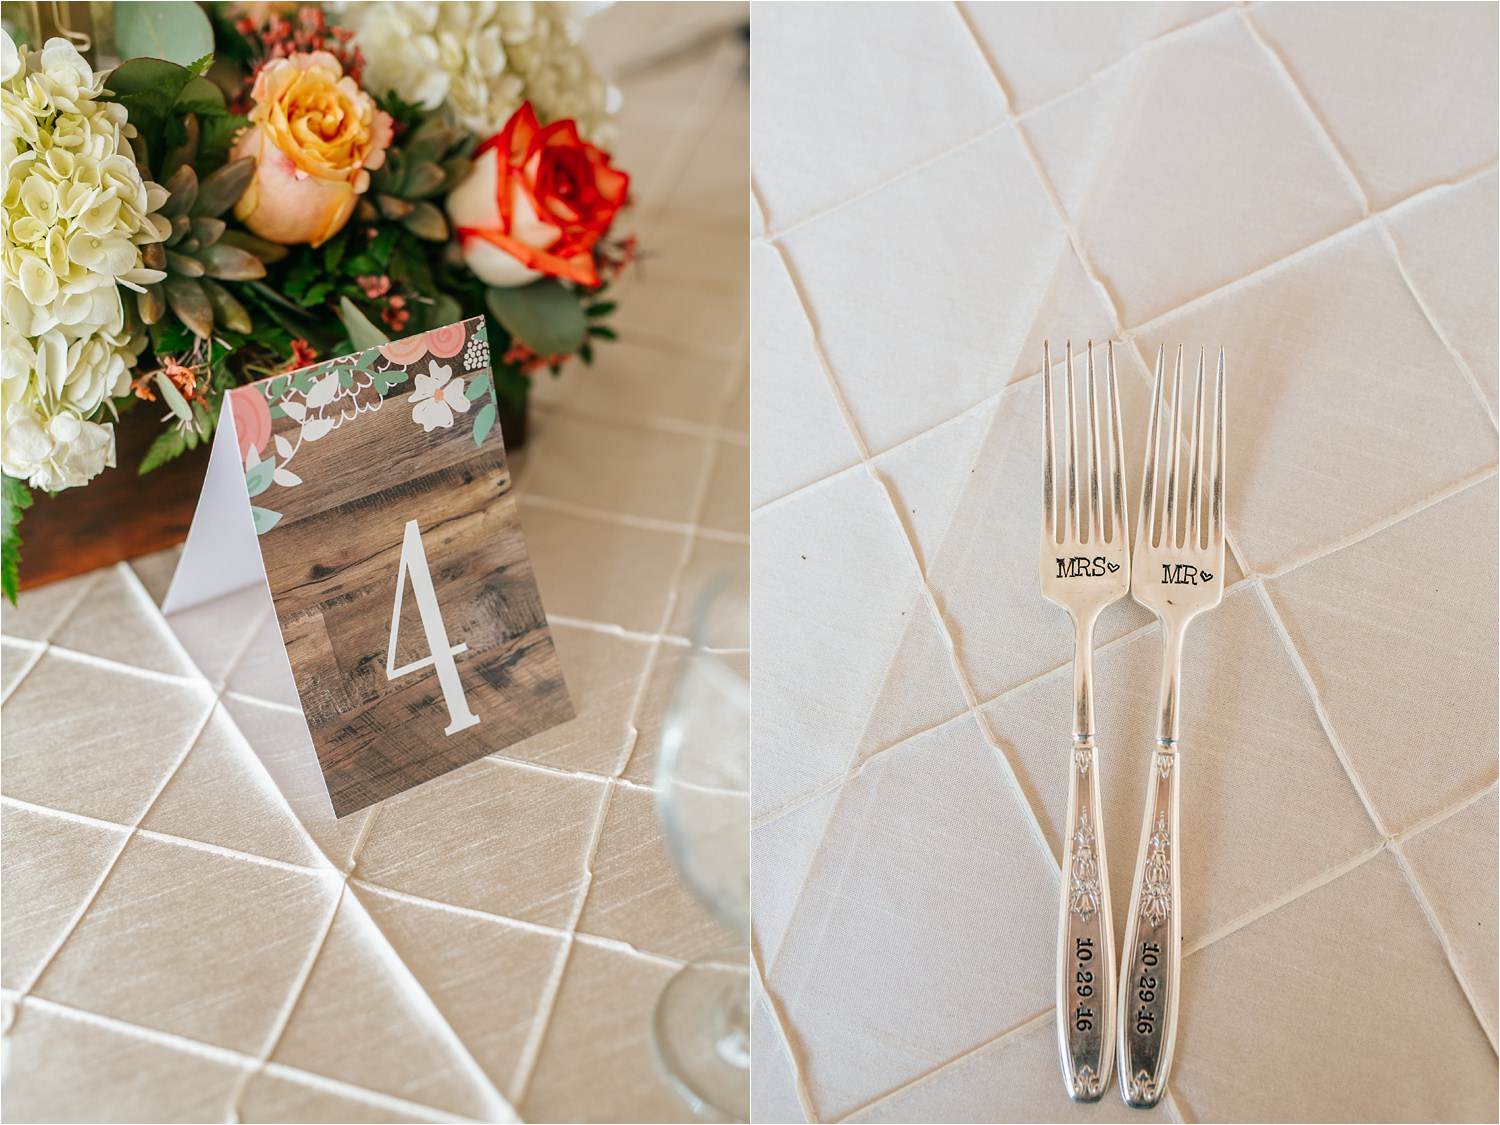 Wedding Decor and Reception Details - http://brittneyhannonphotography.com